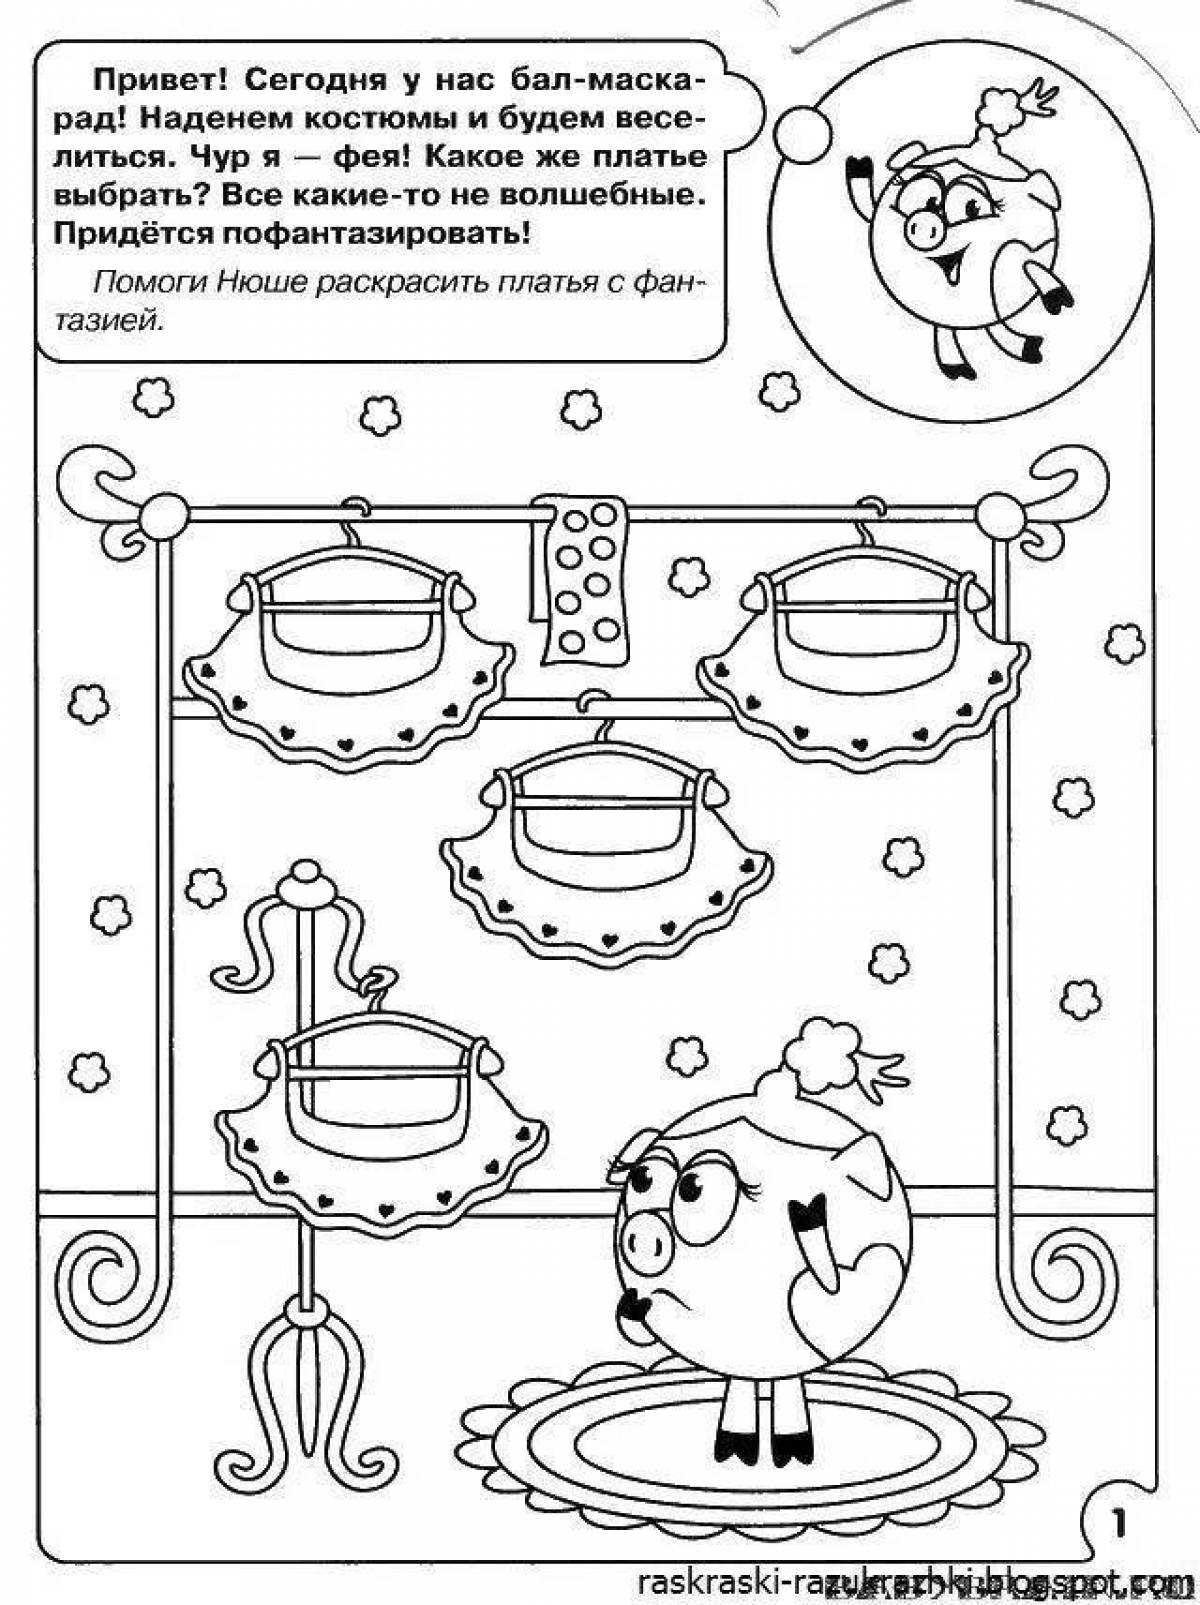 Creative coloring book for 5-6 year olds